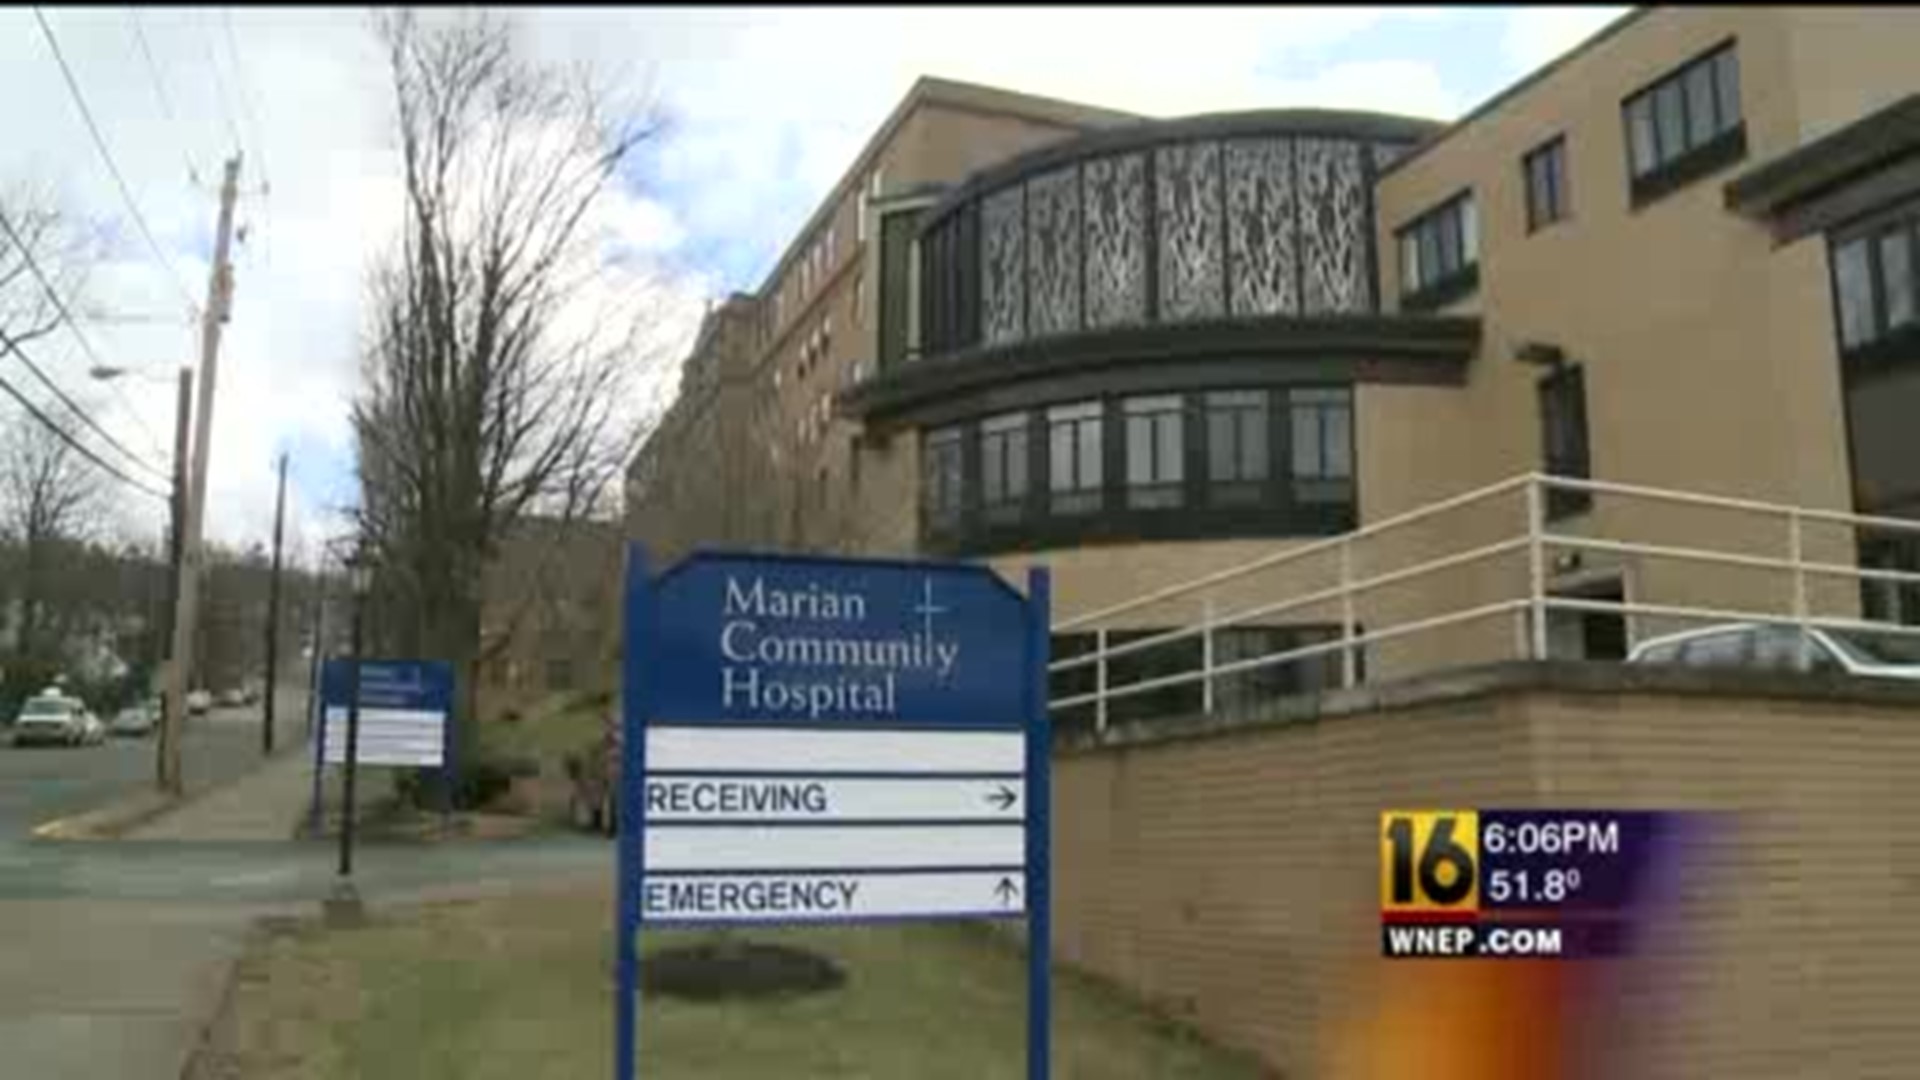 More Bad News for Marian Community Hospital